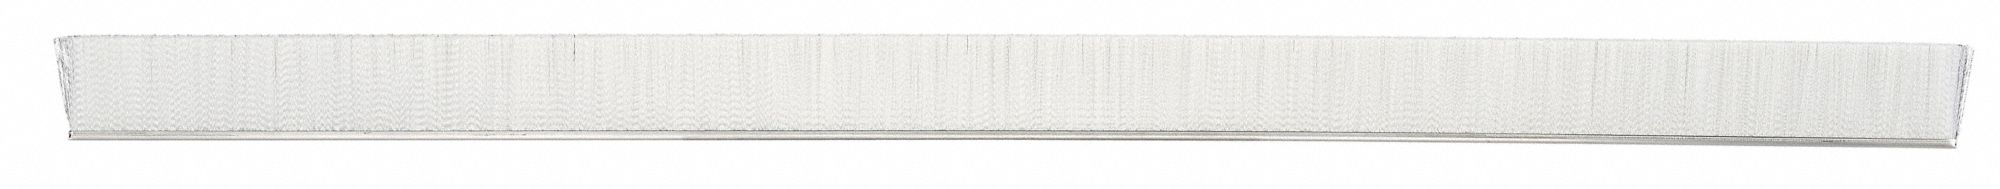 Tanis Brush MB760212 Strip Brush with 5/16 Type #7 Stainless Steel Backing 0.008 Bristle Diameter White Polyester Bristles 12 Overall Length 1 Trim Length 